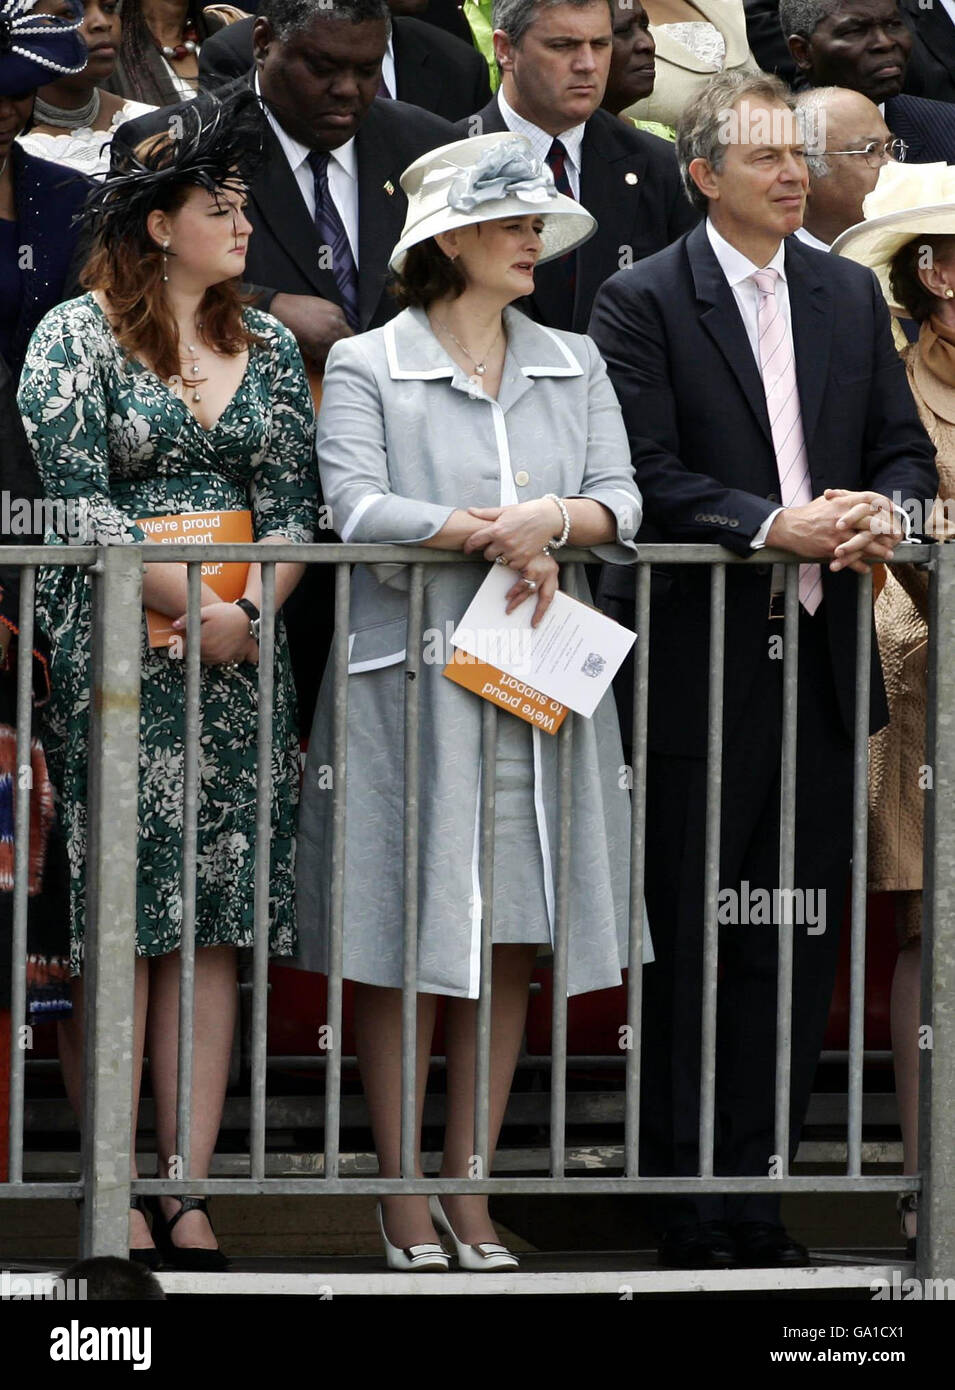 Prime Minister Tony Blair (right) with (L-R) his daughter Kathryn and wife Cherie watching the annual Trooping the Colour ceremony. Stock Photo